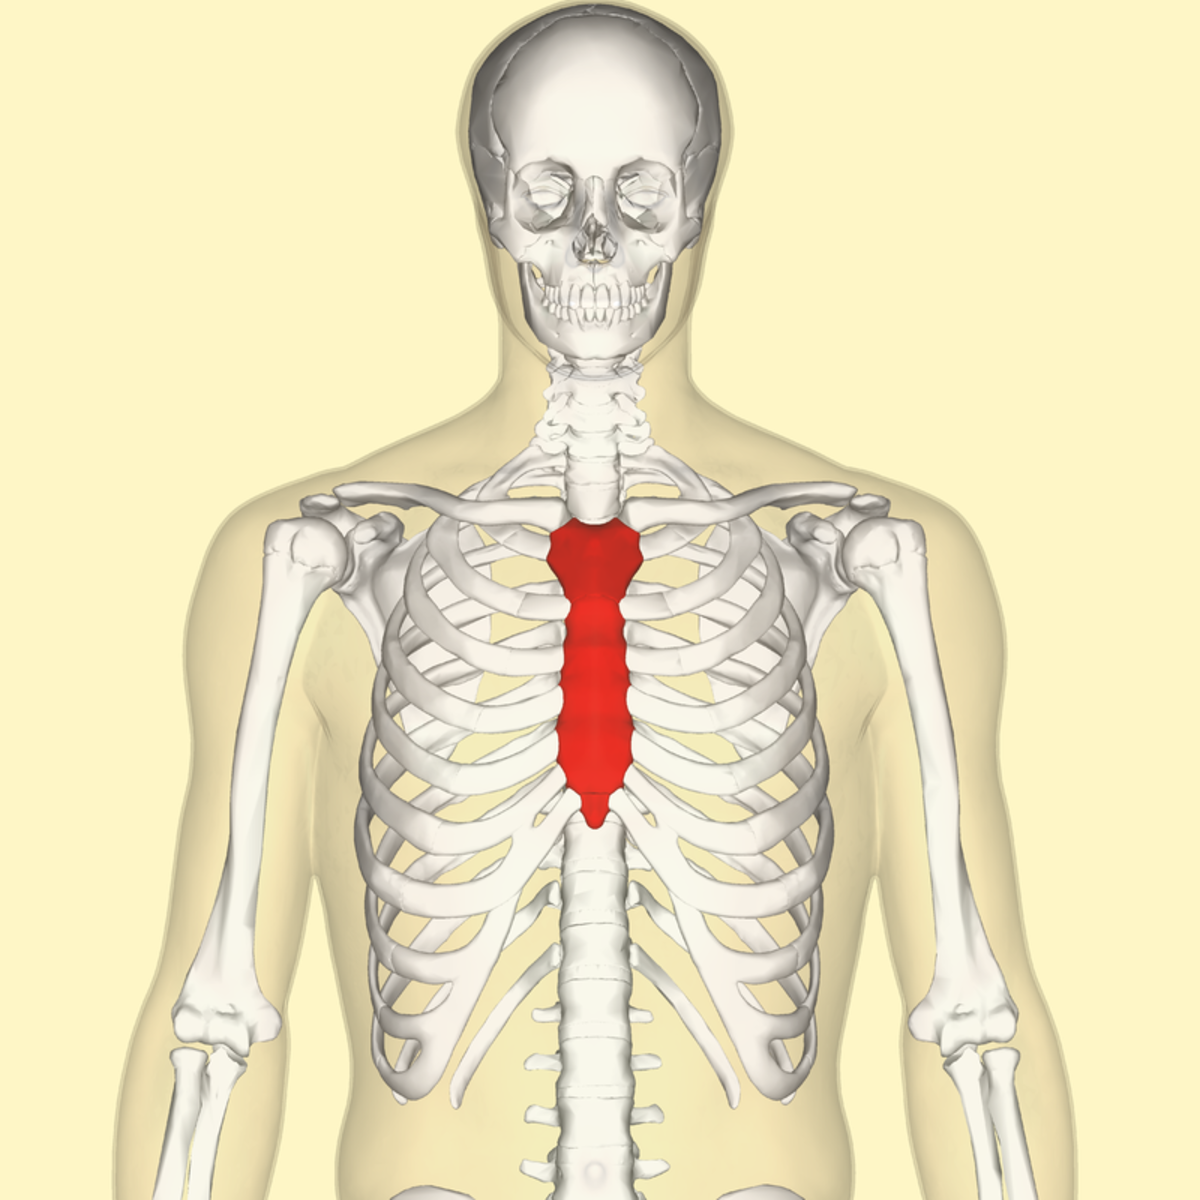 What causes the sternum to pop